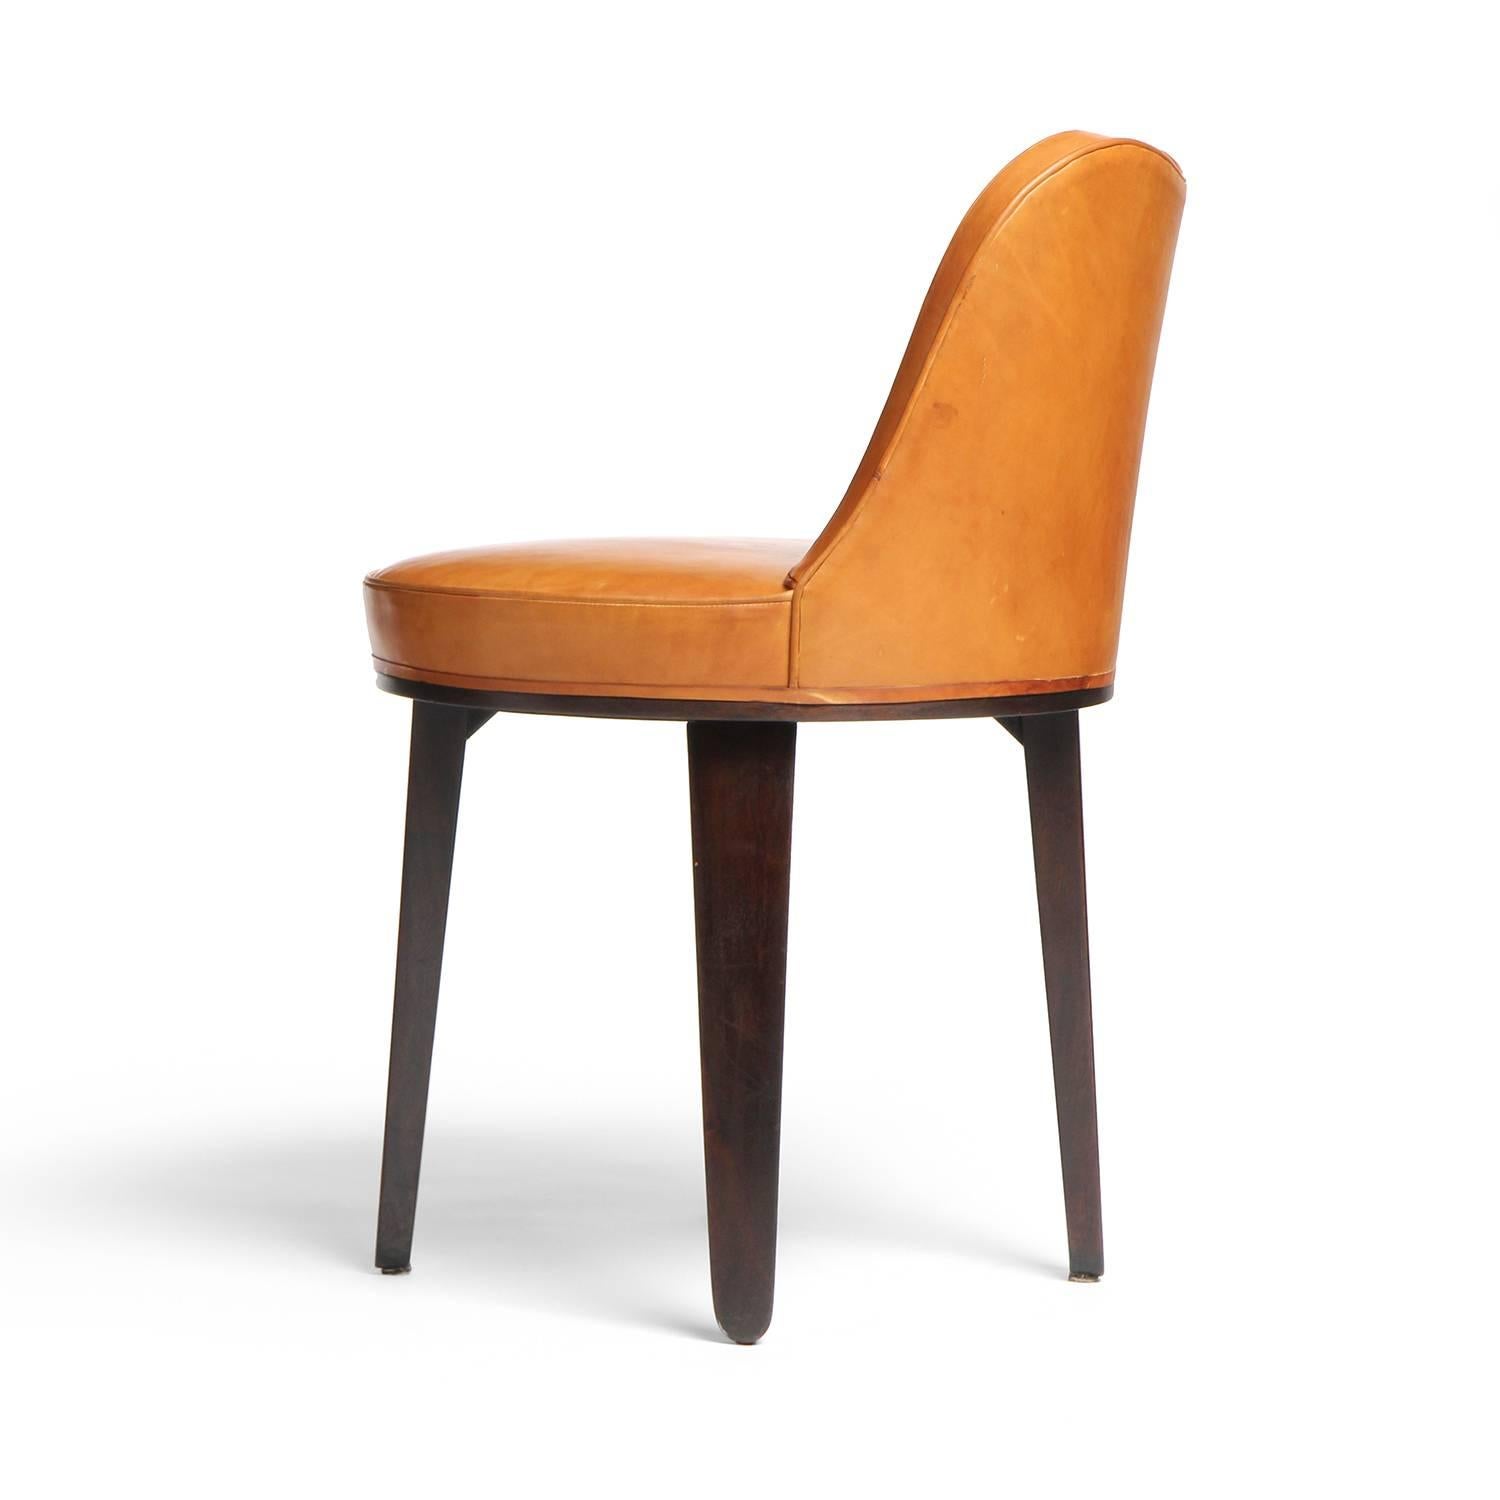 A small sway backed swivel chair with shapely tapered mahogany legs.